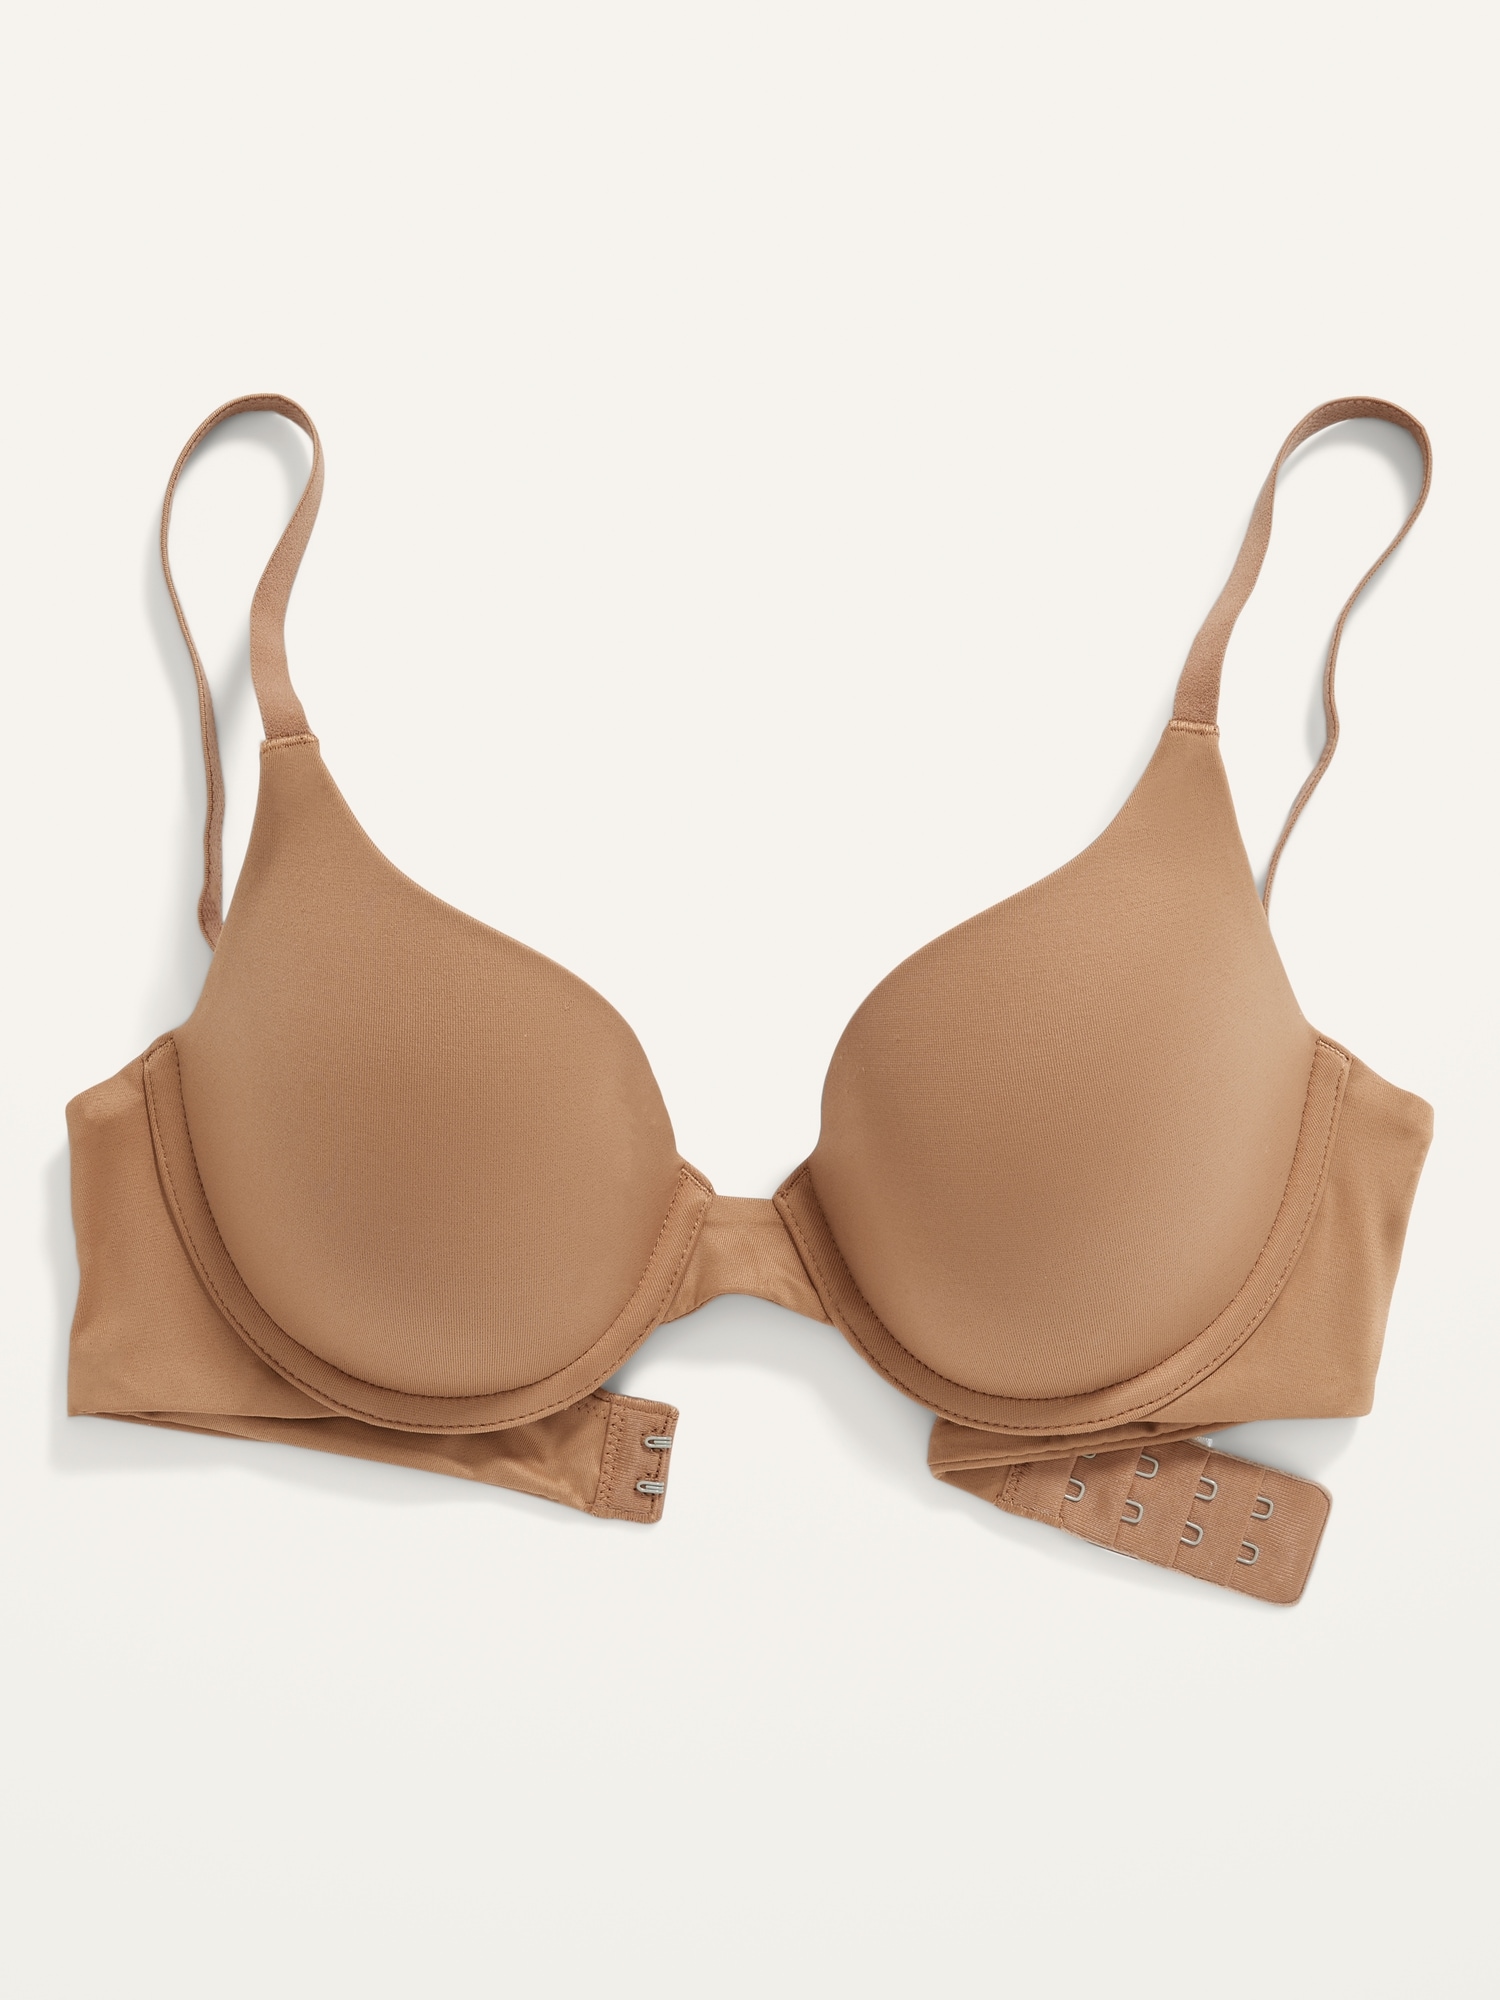 Buy Kamison Women's Full Coverage X-Frame Heavy Bust Everyday Cotton Bra, Double Layer, Non Padded